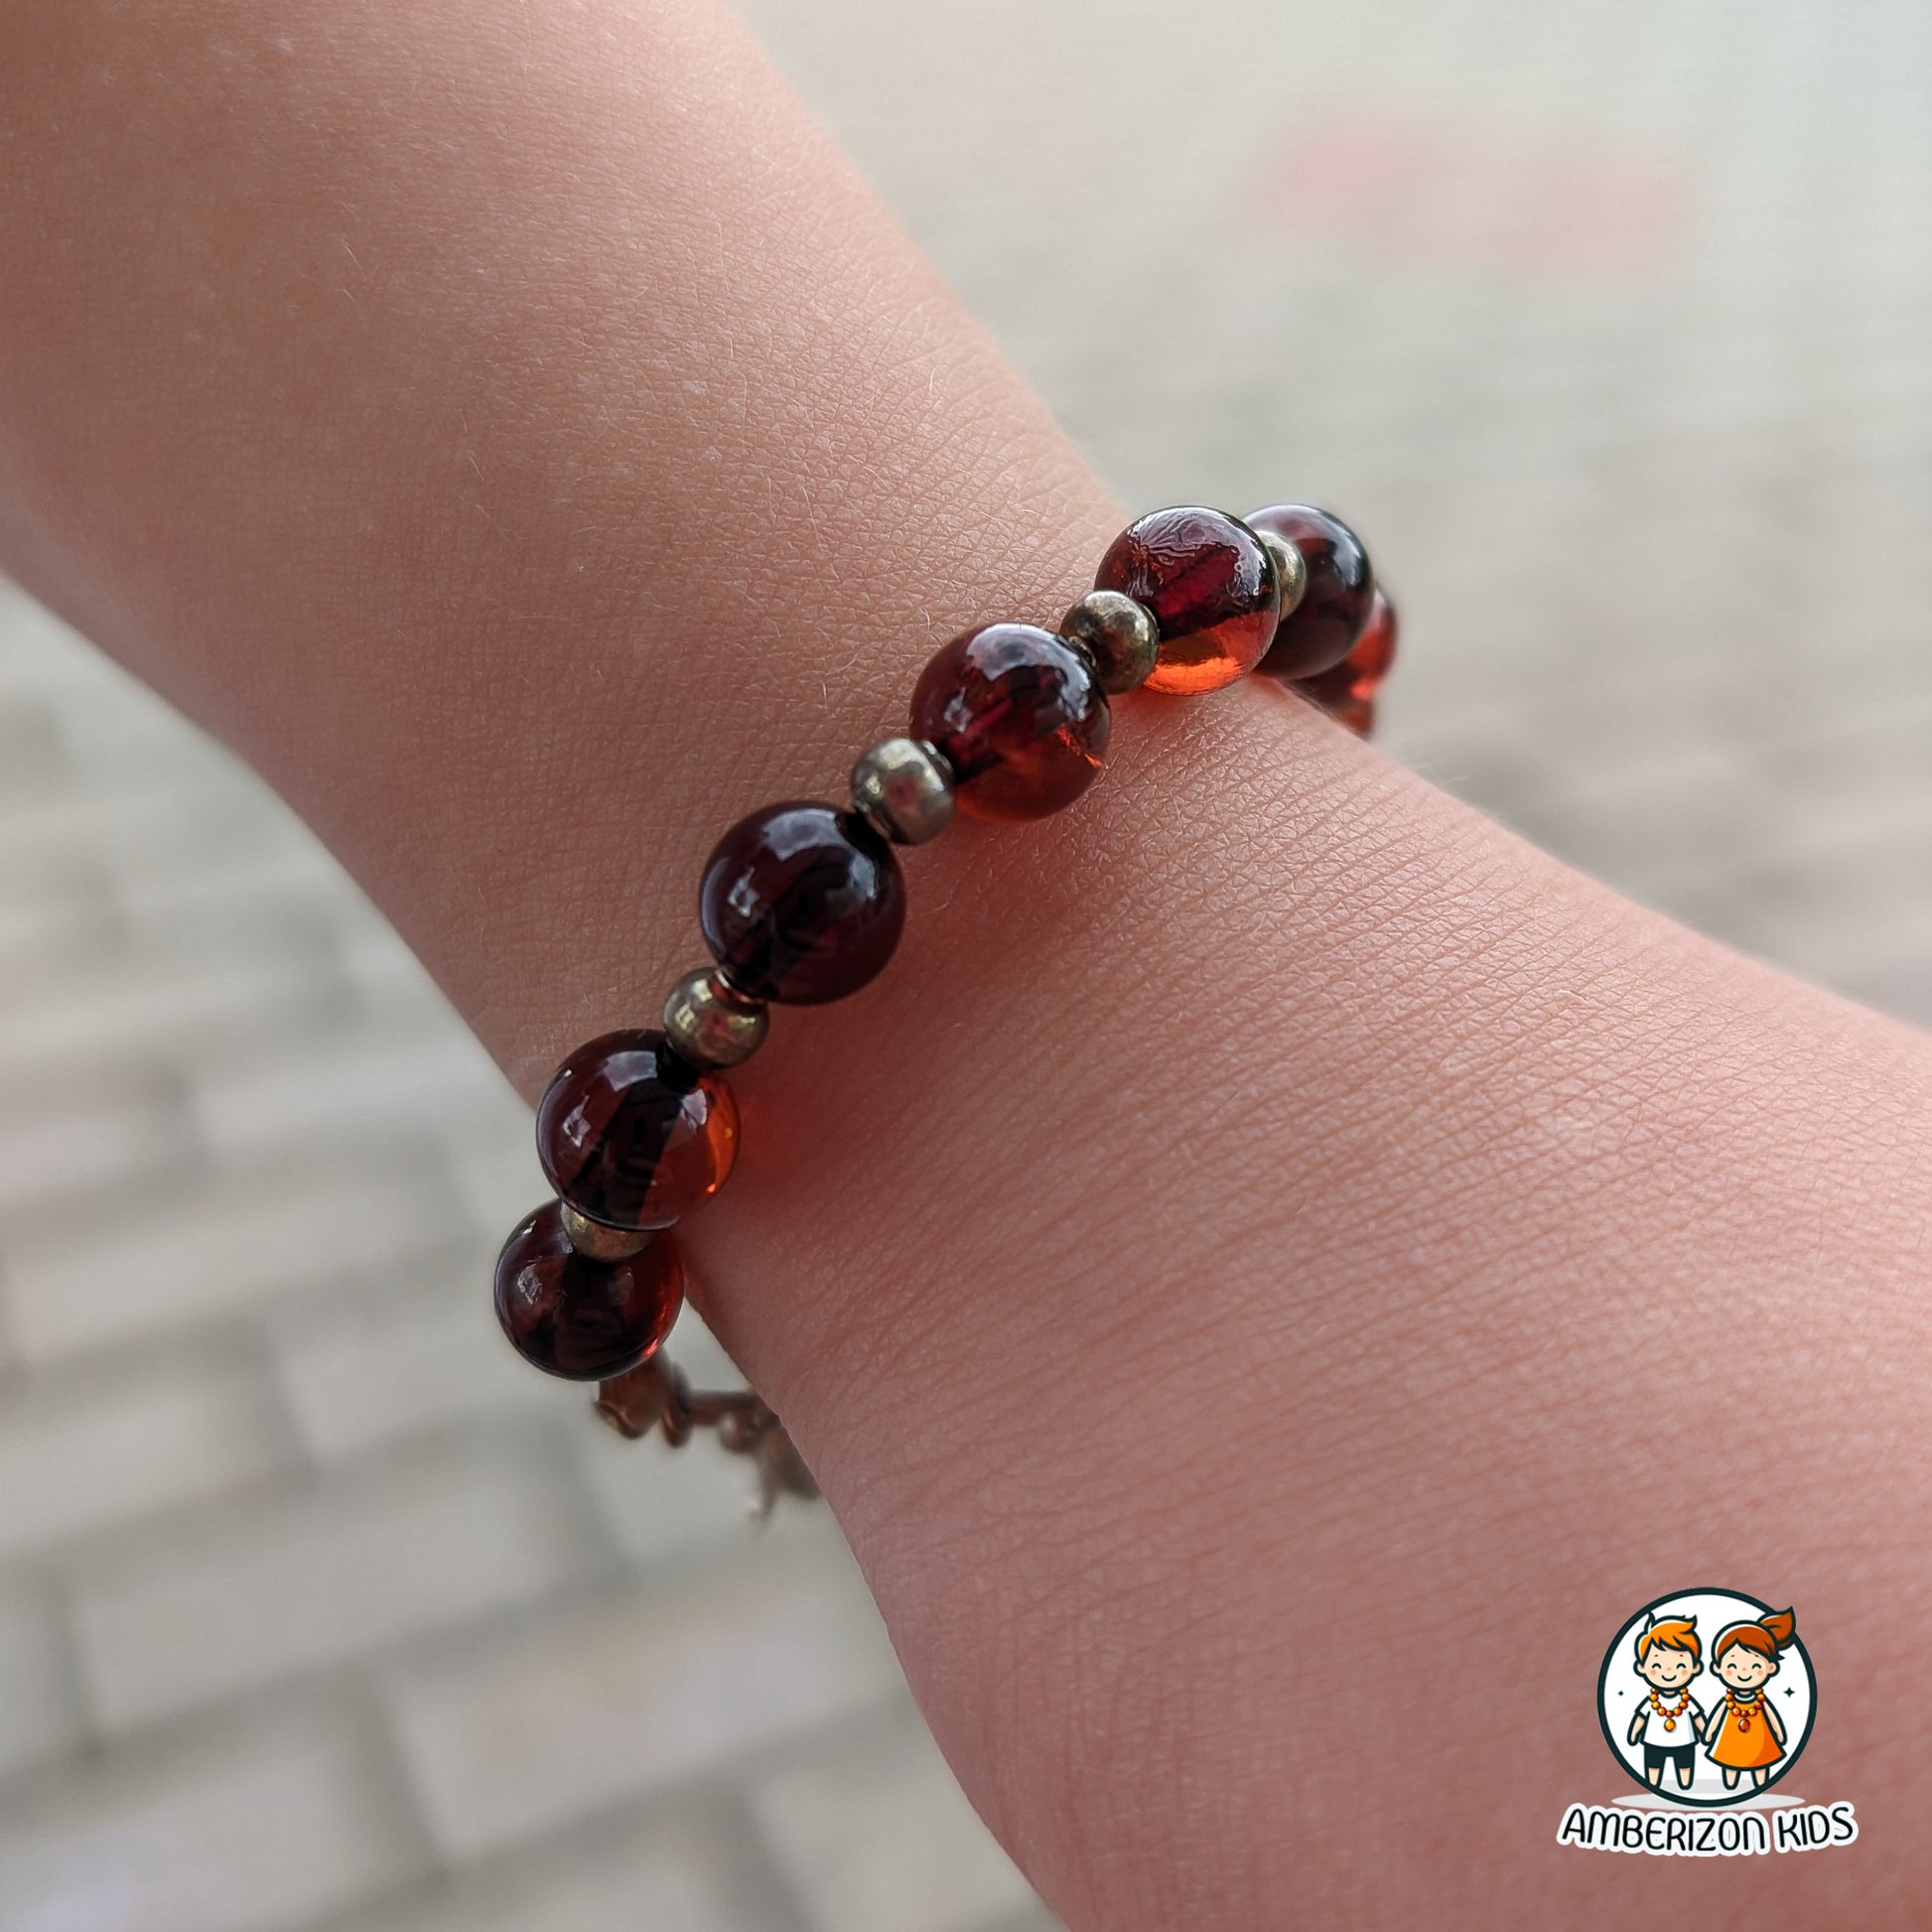 ⌀6mm - Round Baltic amber baby bracelet-anklet - Clear polished cherry balls - Lobster clasp